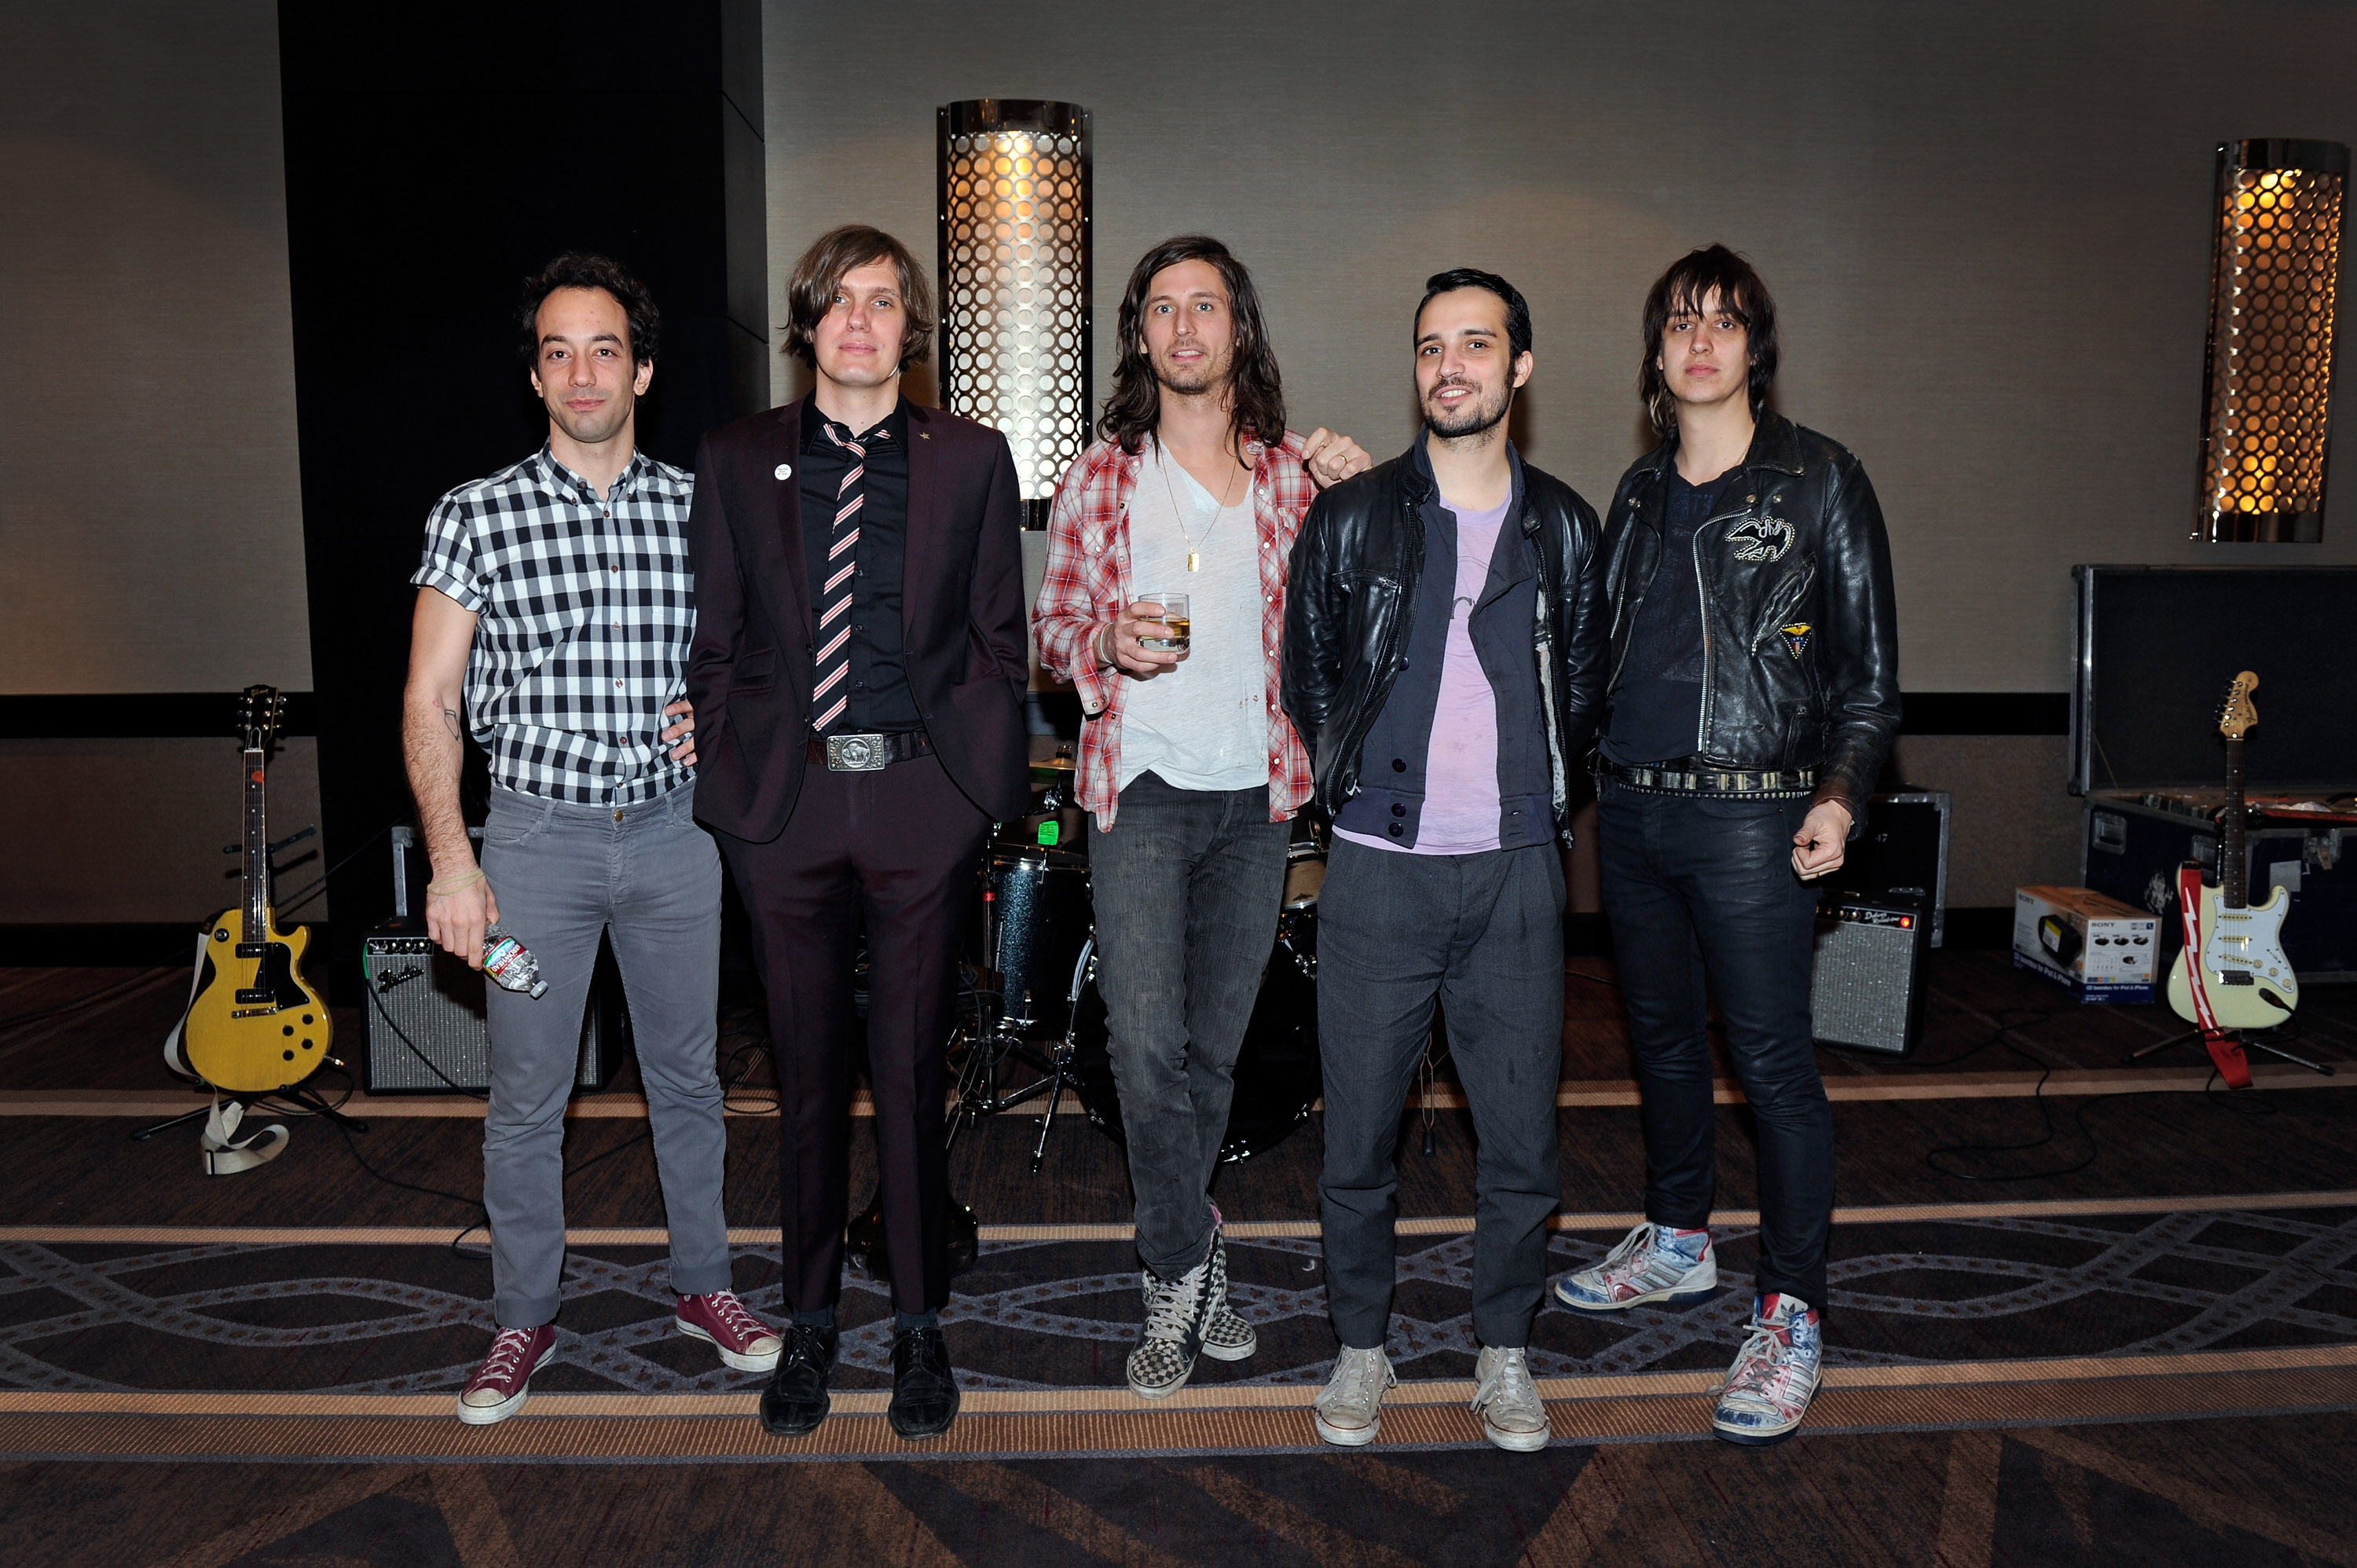 LAS VEGAS, NV - MARCH 12:  (L-R) Albert Hammond Jr, Nikolai Fraiture, Nick Valensi, Fabrizio Moretti and Julian Casablancas of The Strokes attend a meet and greet prior to their concert at The Cosmopolitan of Las Vegas on March 12, 2011 in Las Vegas, Nevada.  (Photo by David Becker/WireImage)